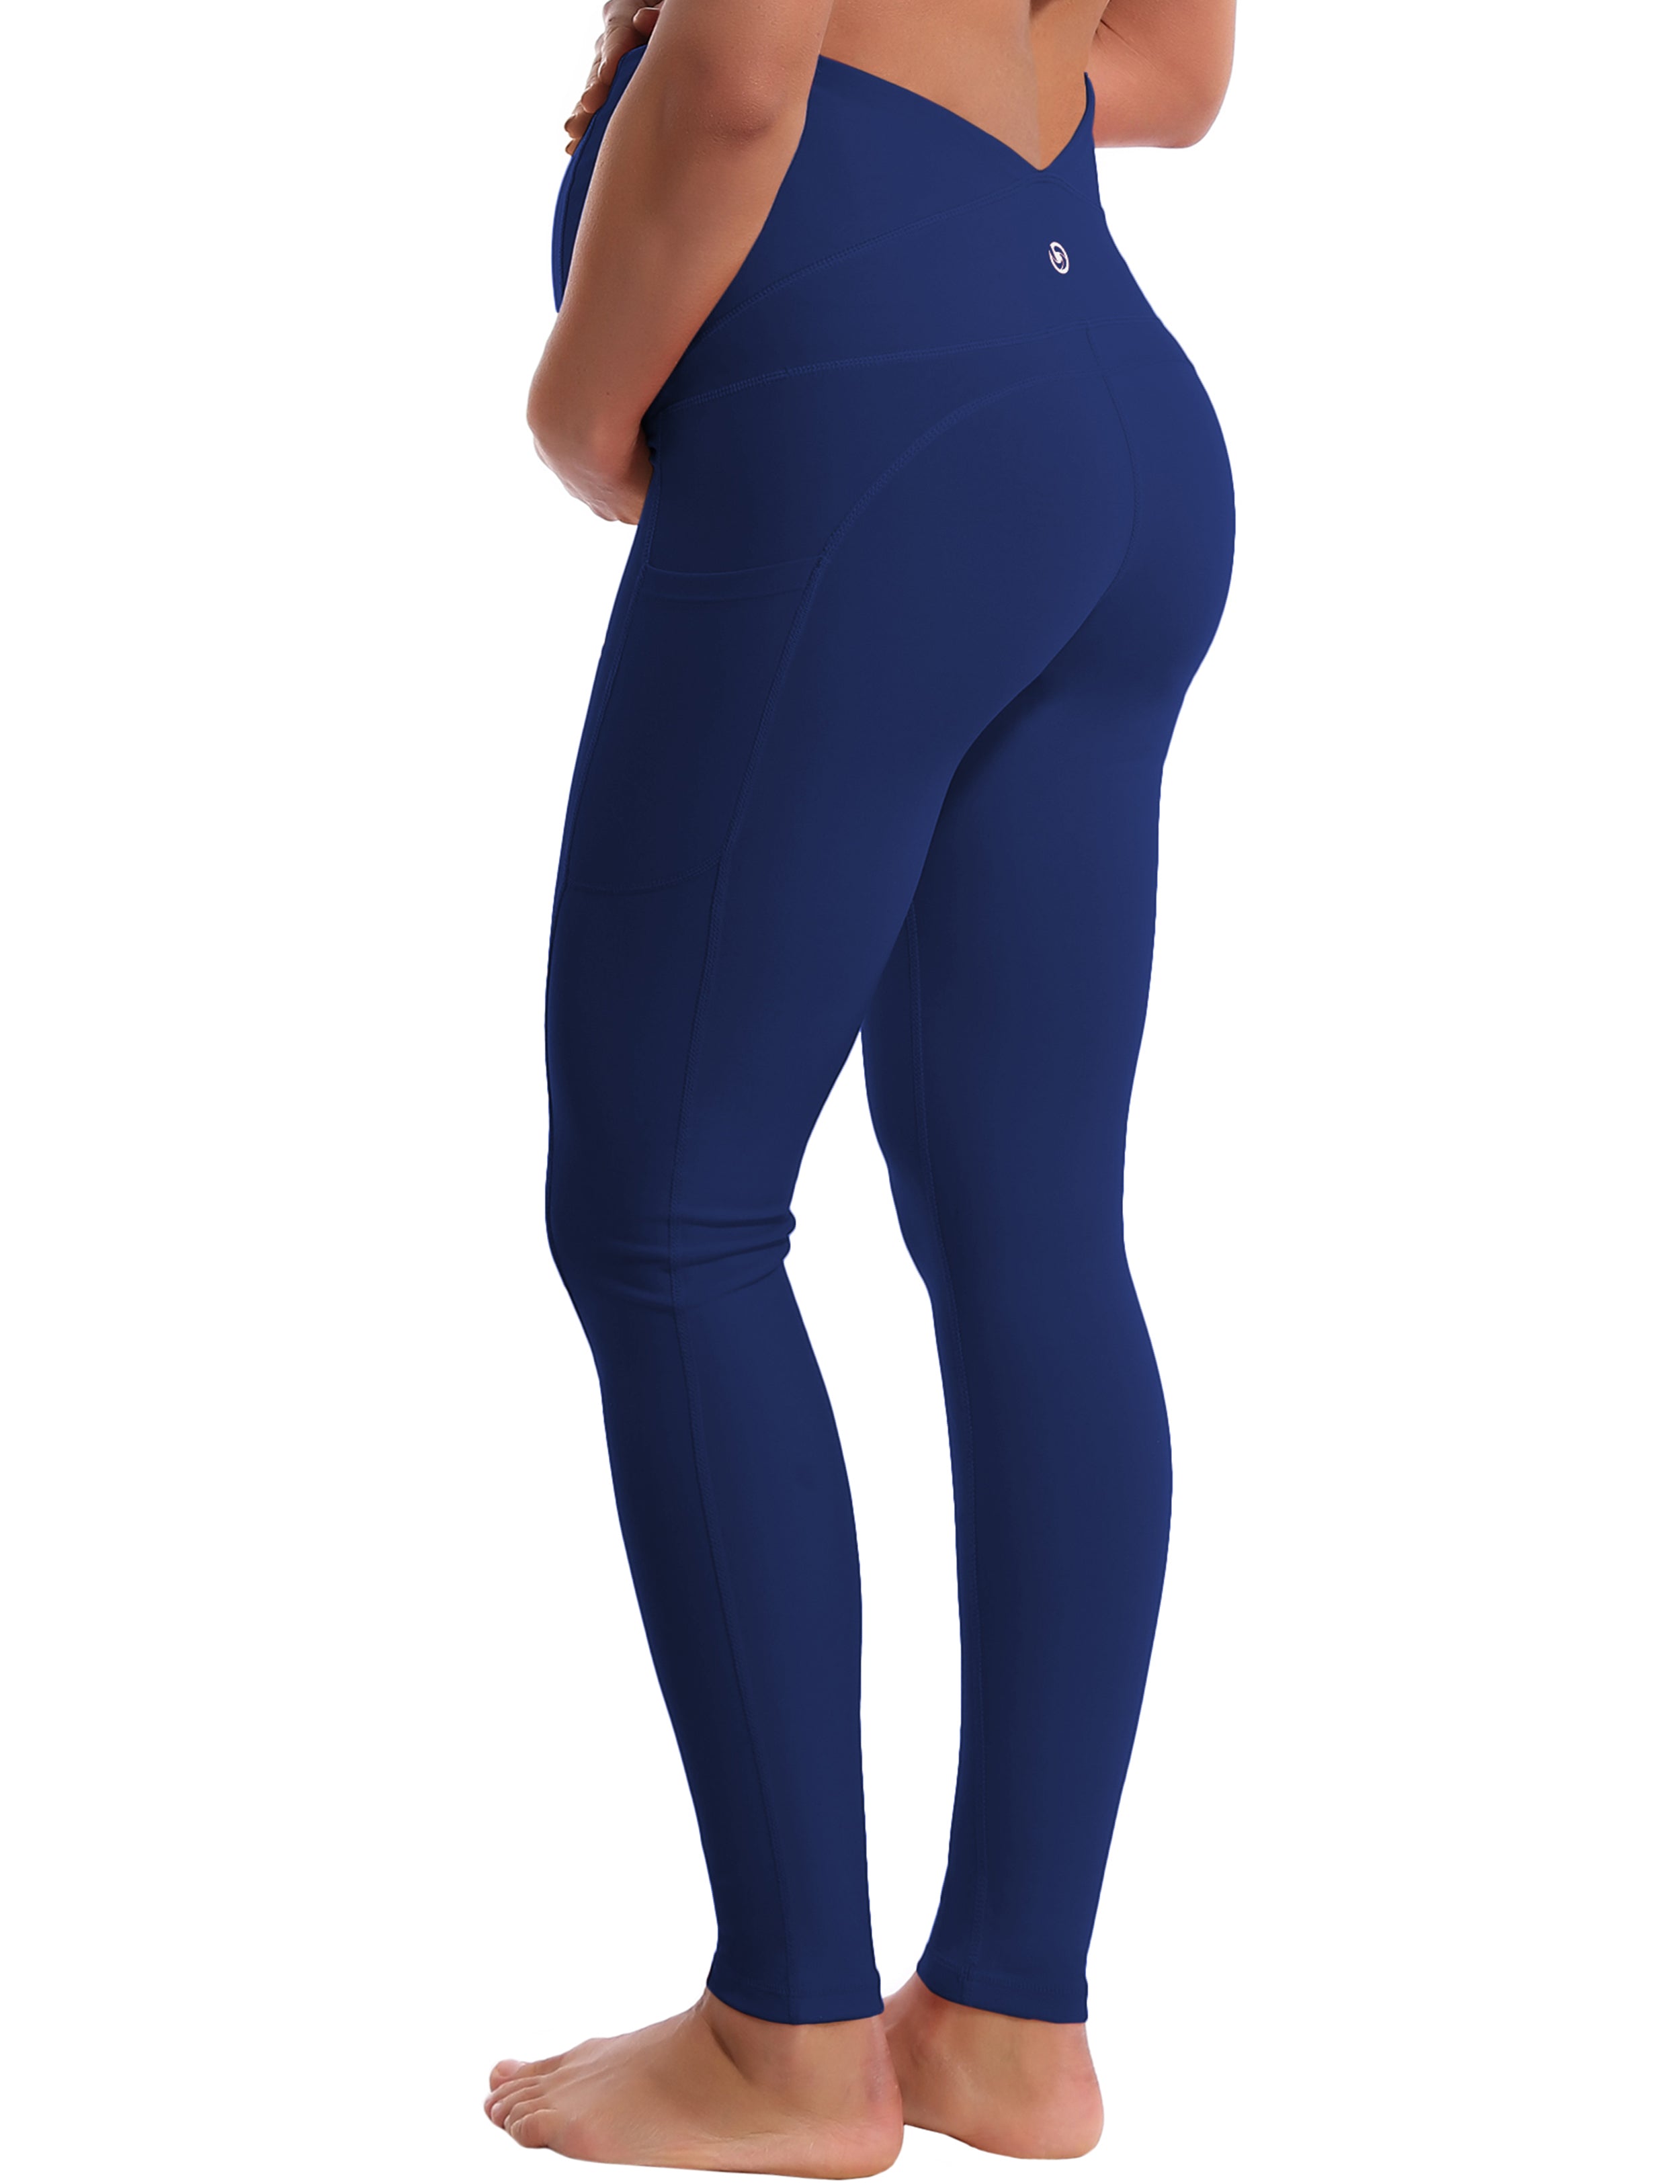 26" Side Pockets Maternity Tall Size Pants navy 87%Nylon/13%Spandex Softest-ever fabric High elasticity 4-way stretch Fabric doesn't attract lint easily No see-through Moisture-wicking Machine wash